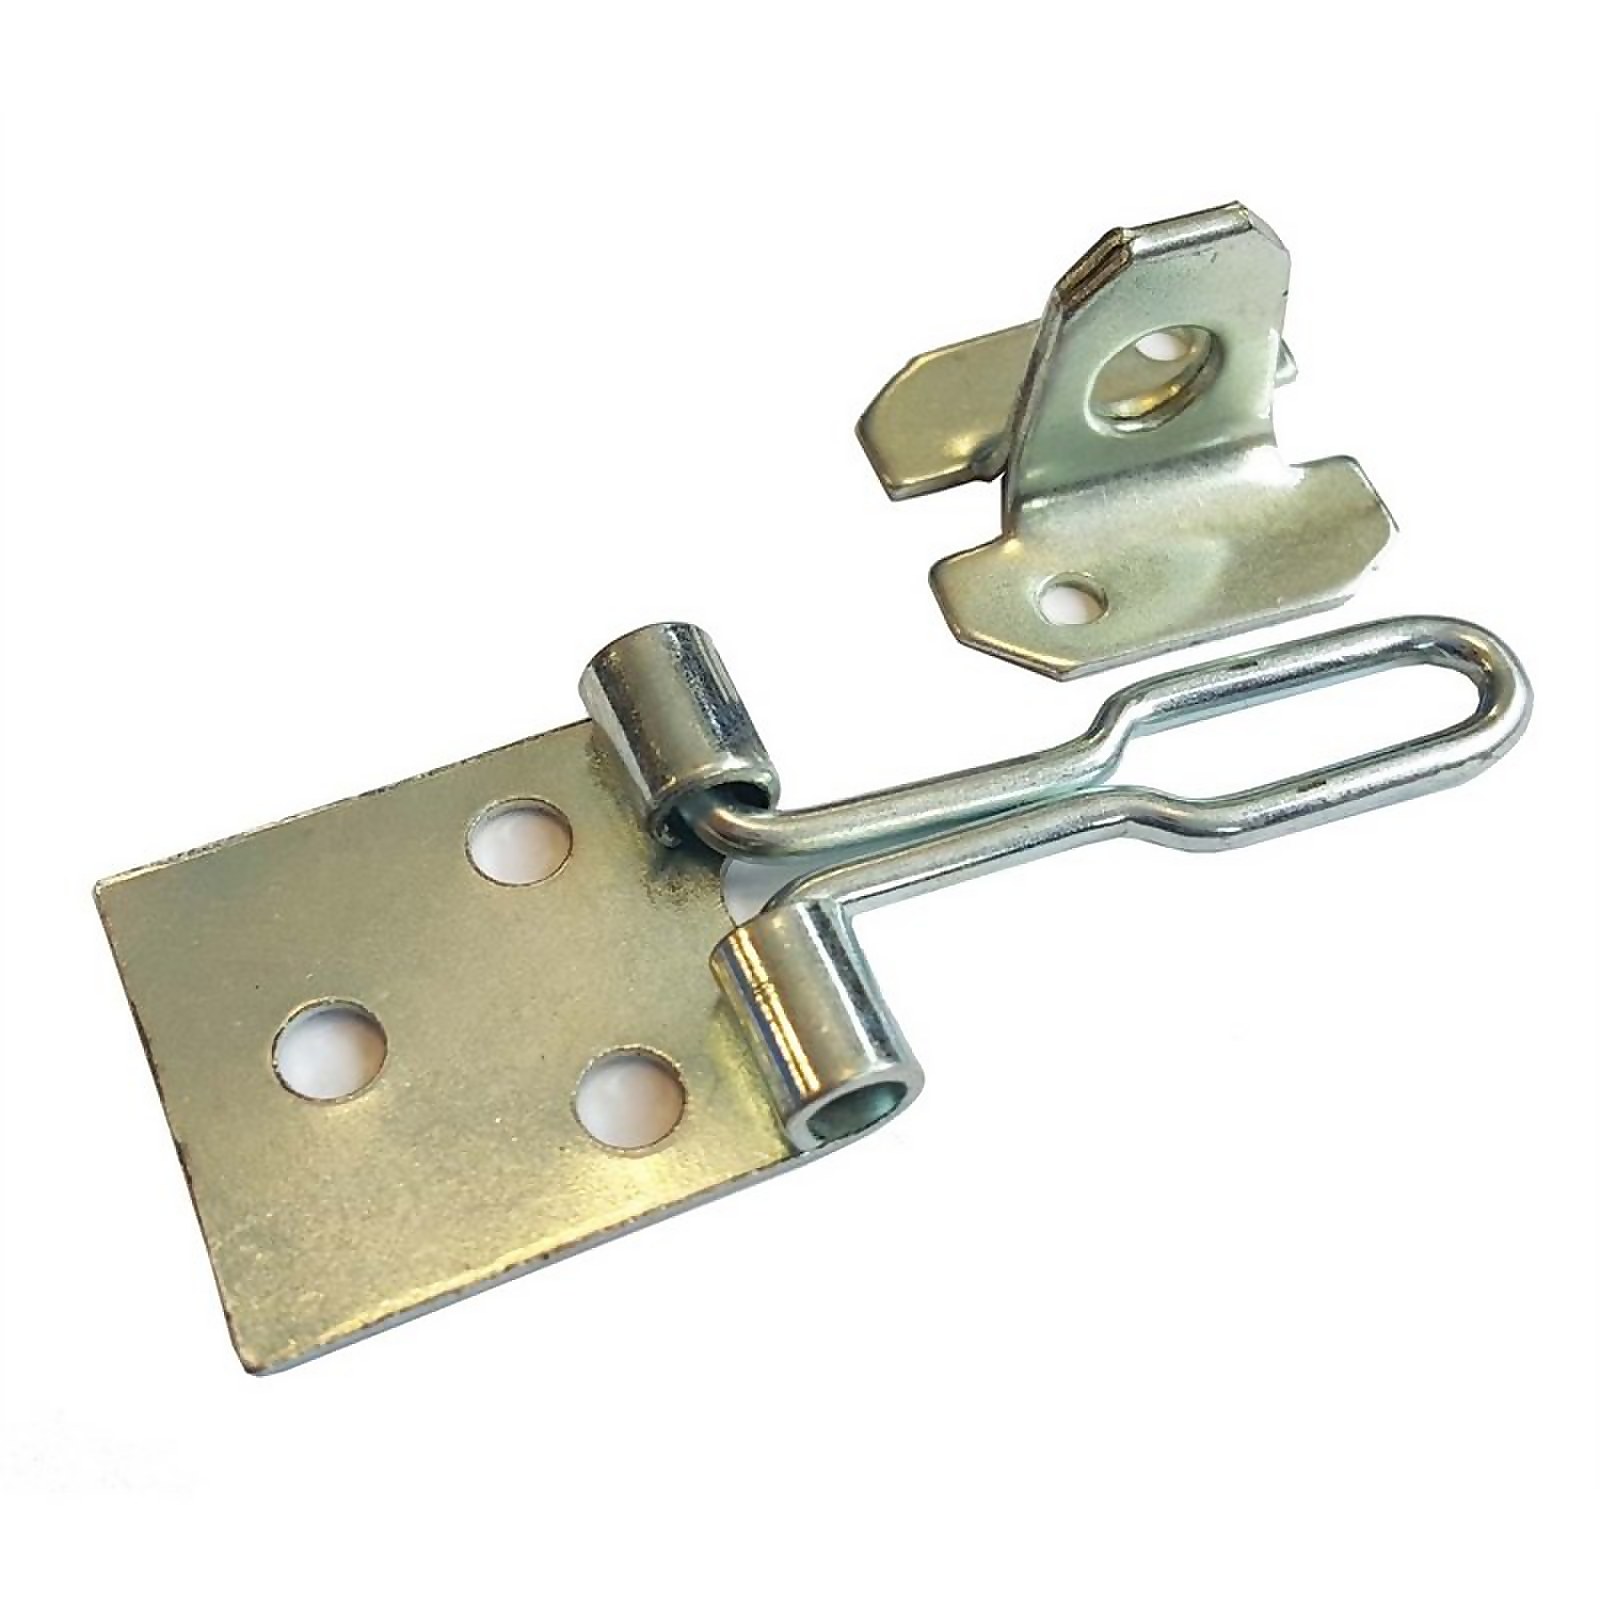 Photo of Wire Hasp & Staple - Zinc Plated - 76mm